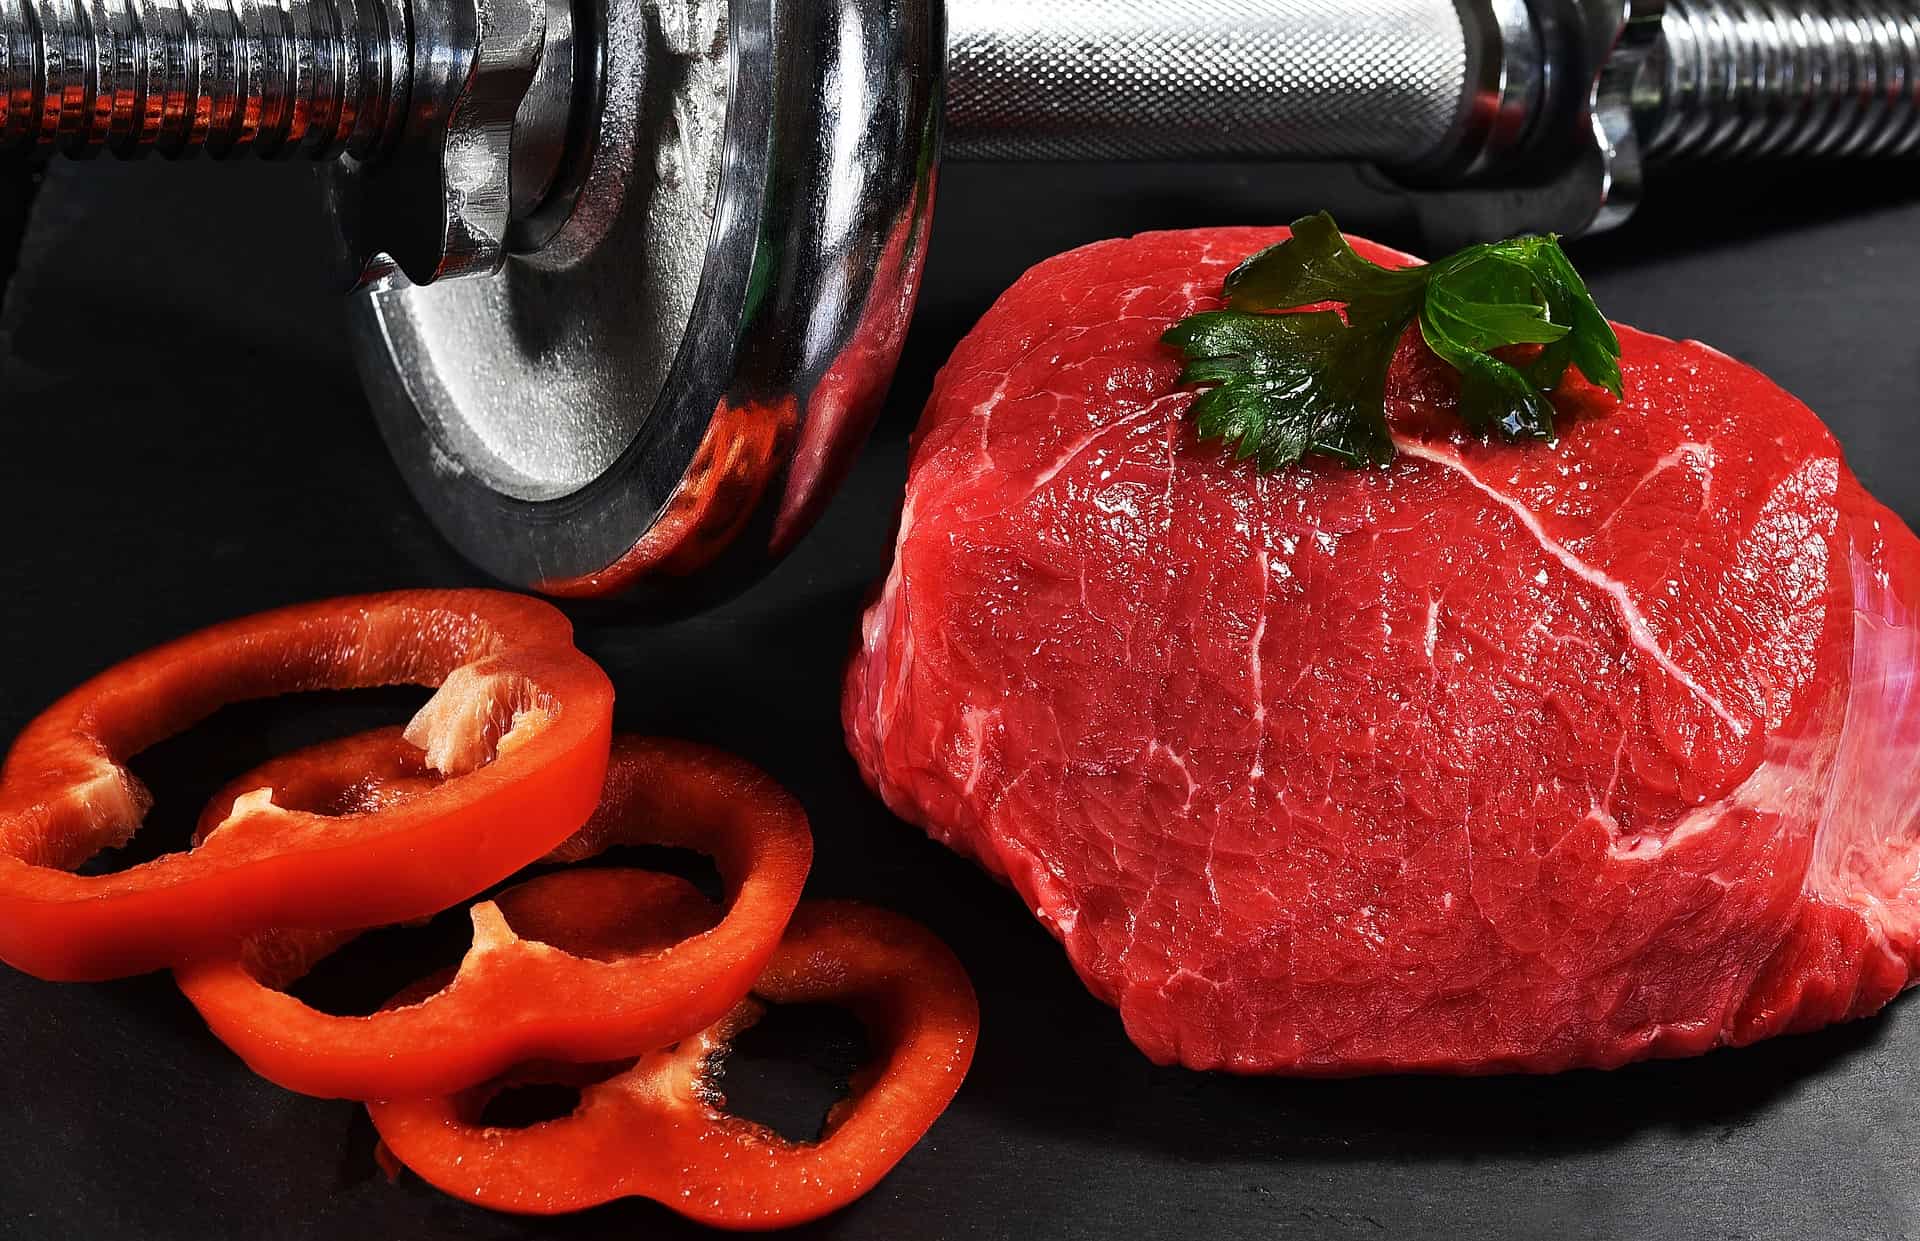 Why is protein so important in an athlete’s diet?